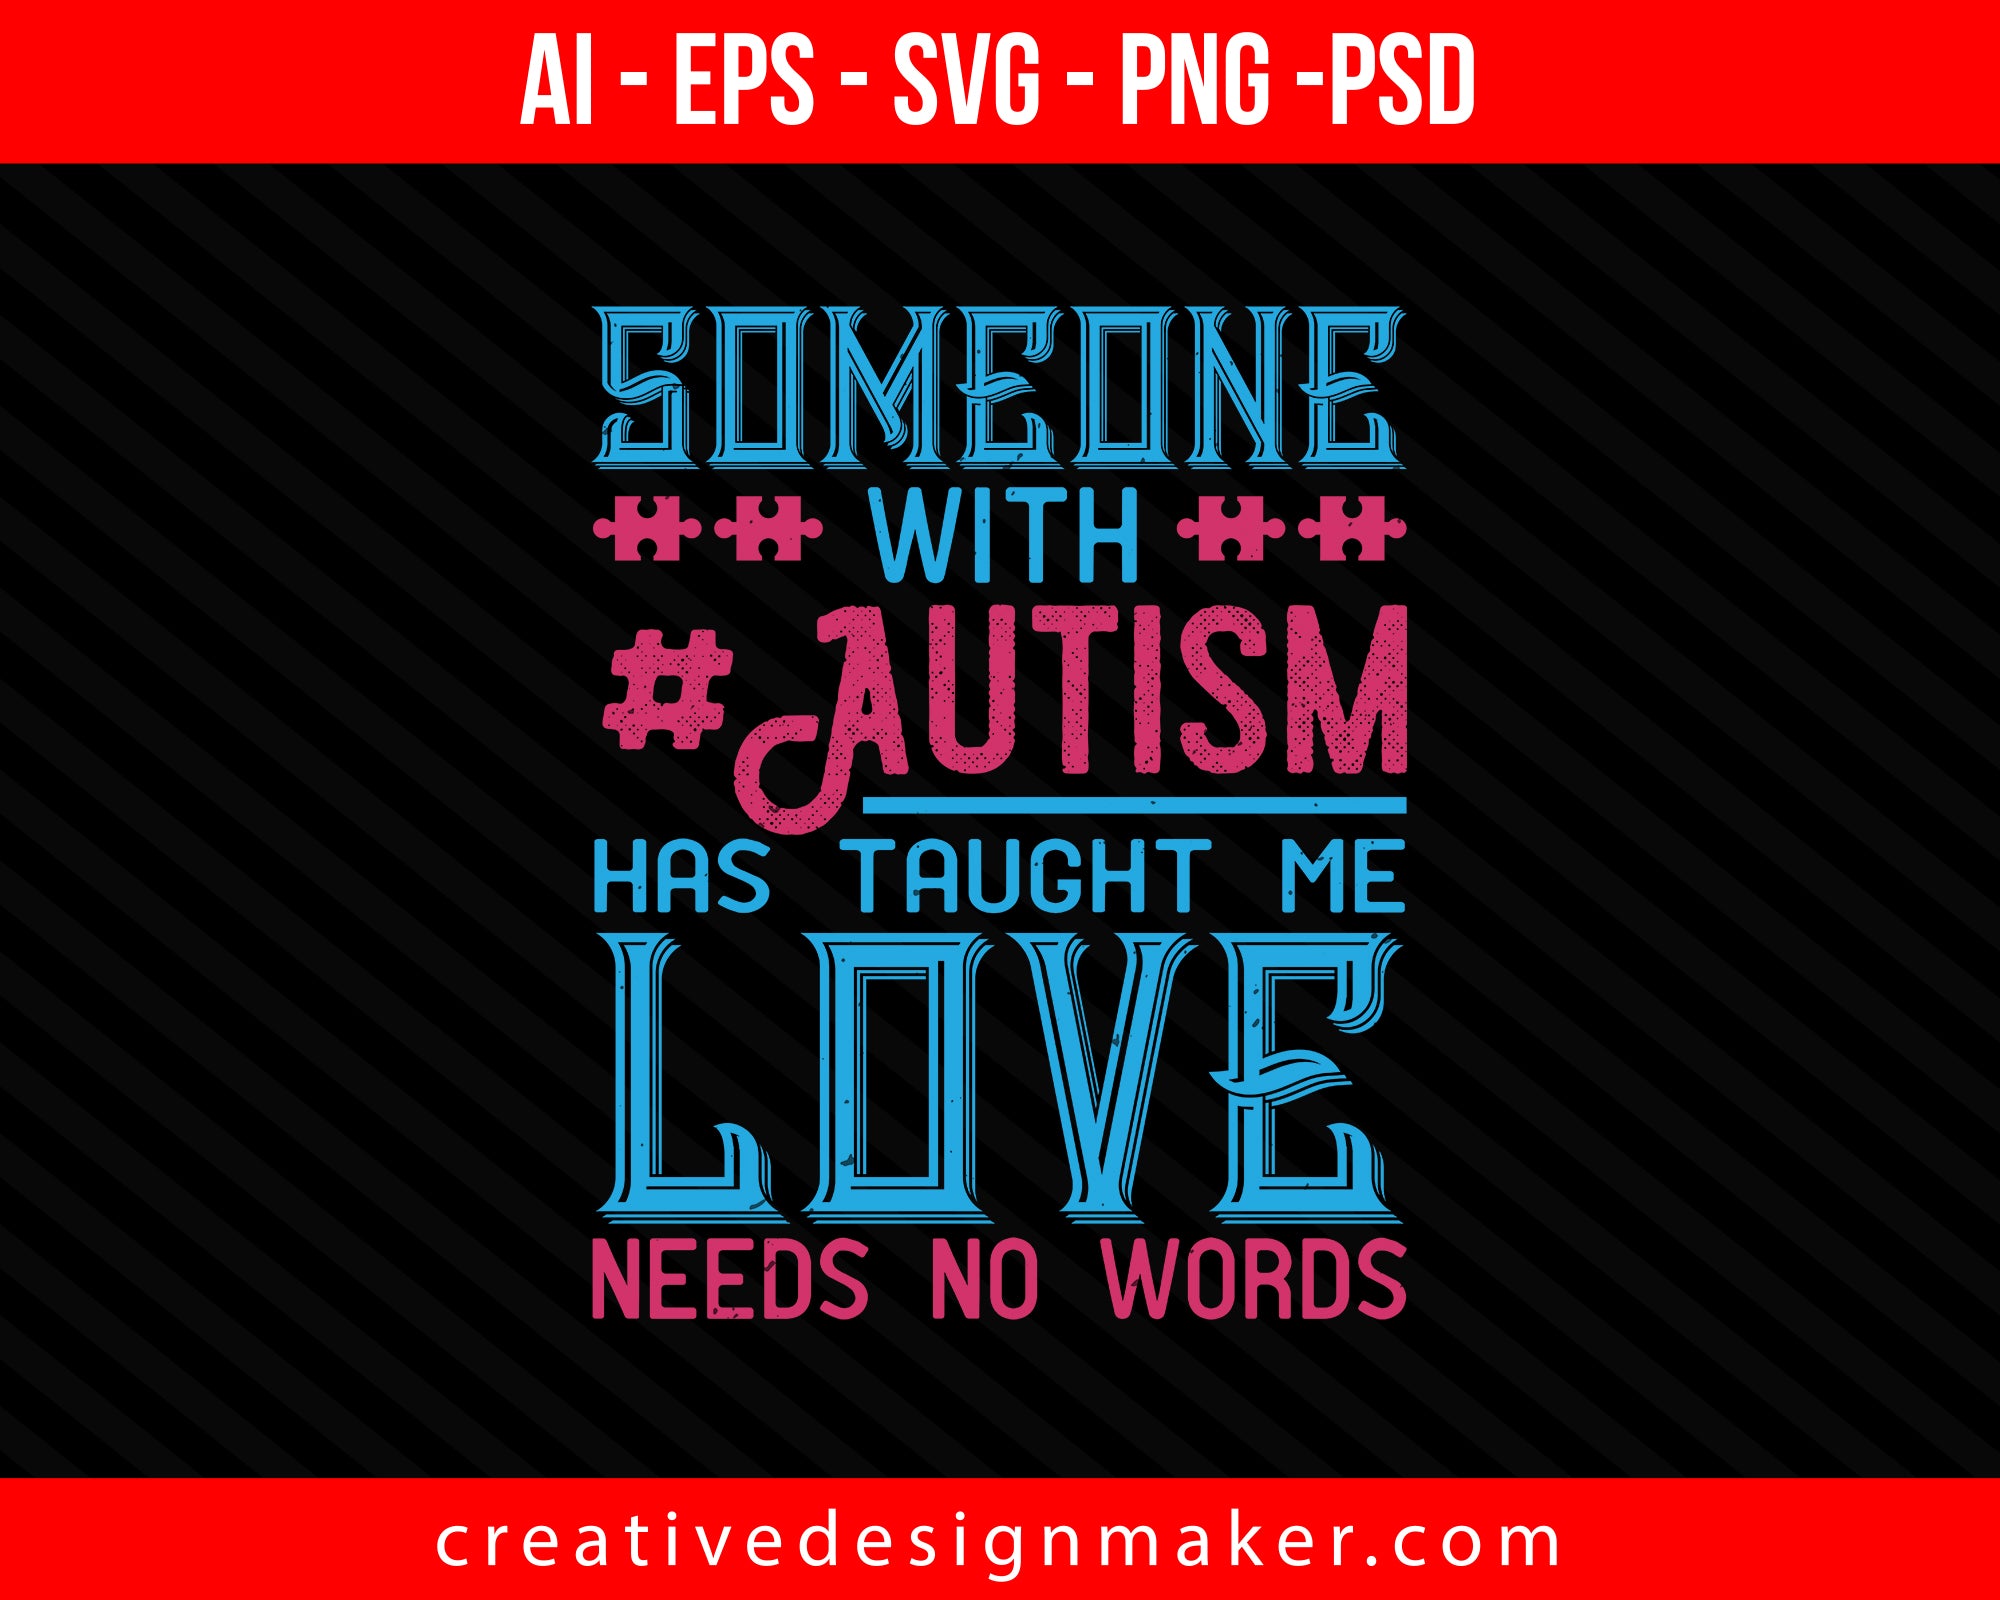 Someone with #Autism has taught me love needs no words Print Ready Editable T-Shirt SVG Design!